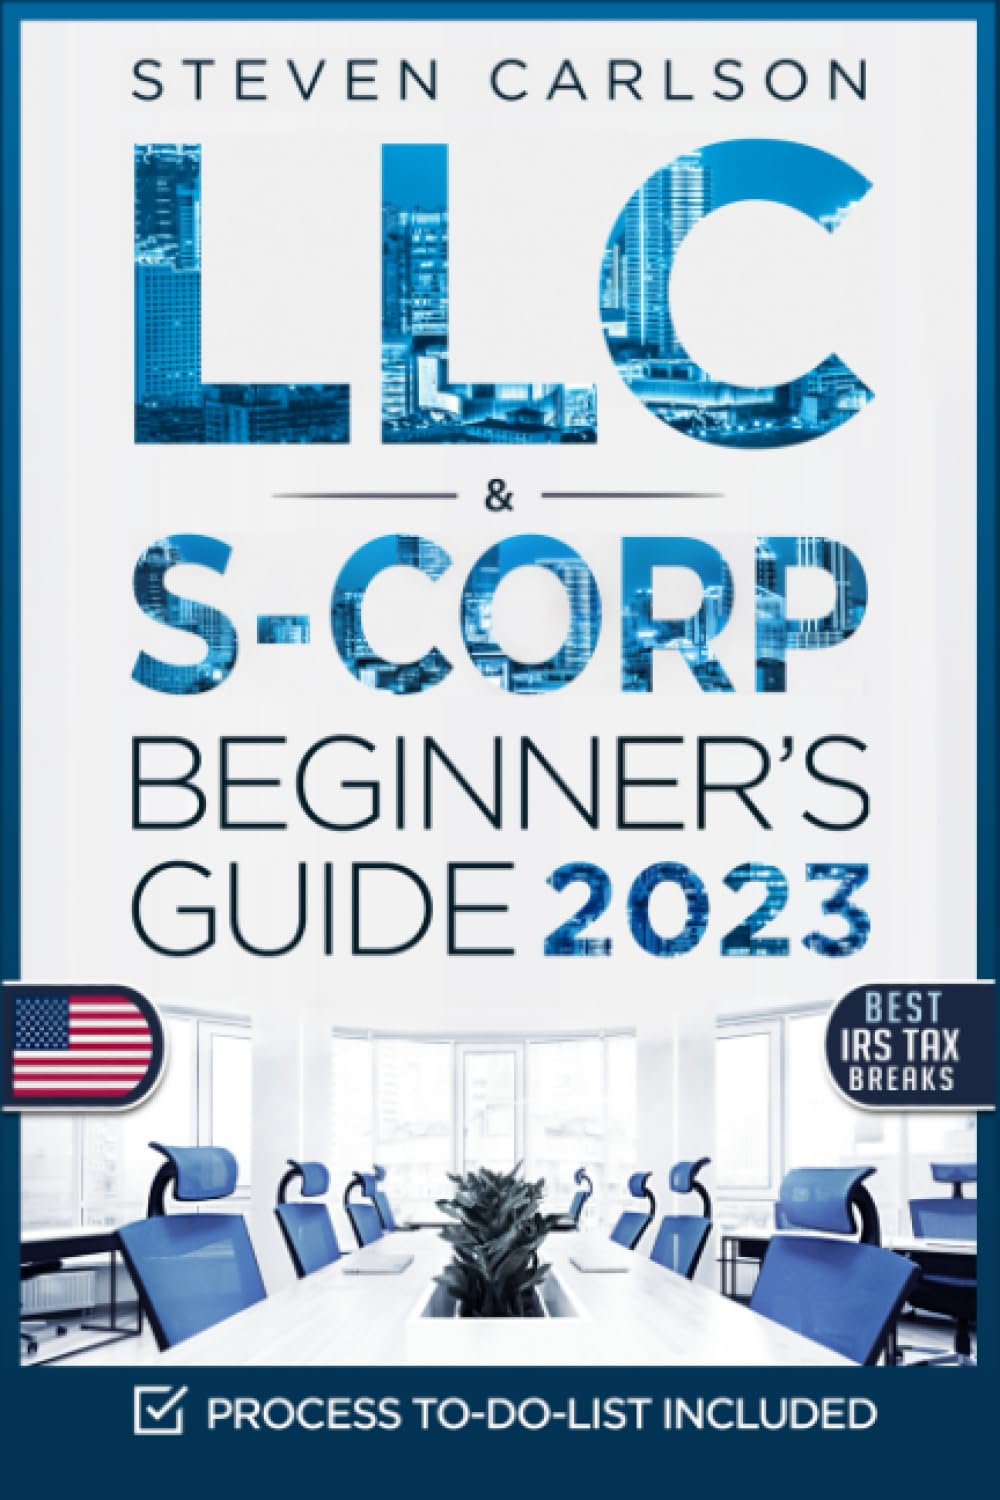 LLC & S-Corporation Beginner's Guide, Updated Edition: 2 Books in 1: The Most Complete Guide on How to Form, Manage Your LLC & S-Corp and Save on Taxes as a Small Business Owner (Start A Business)